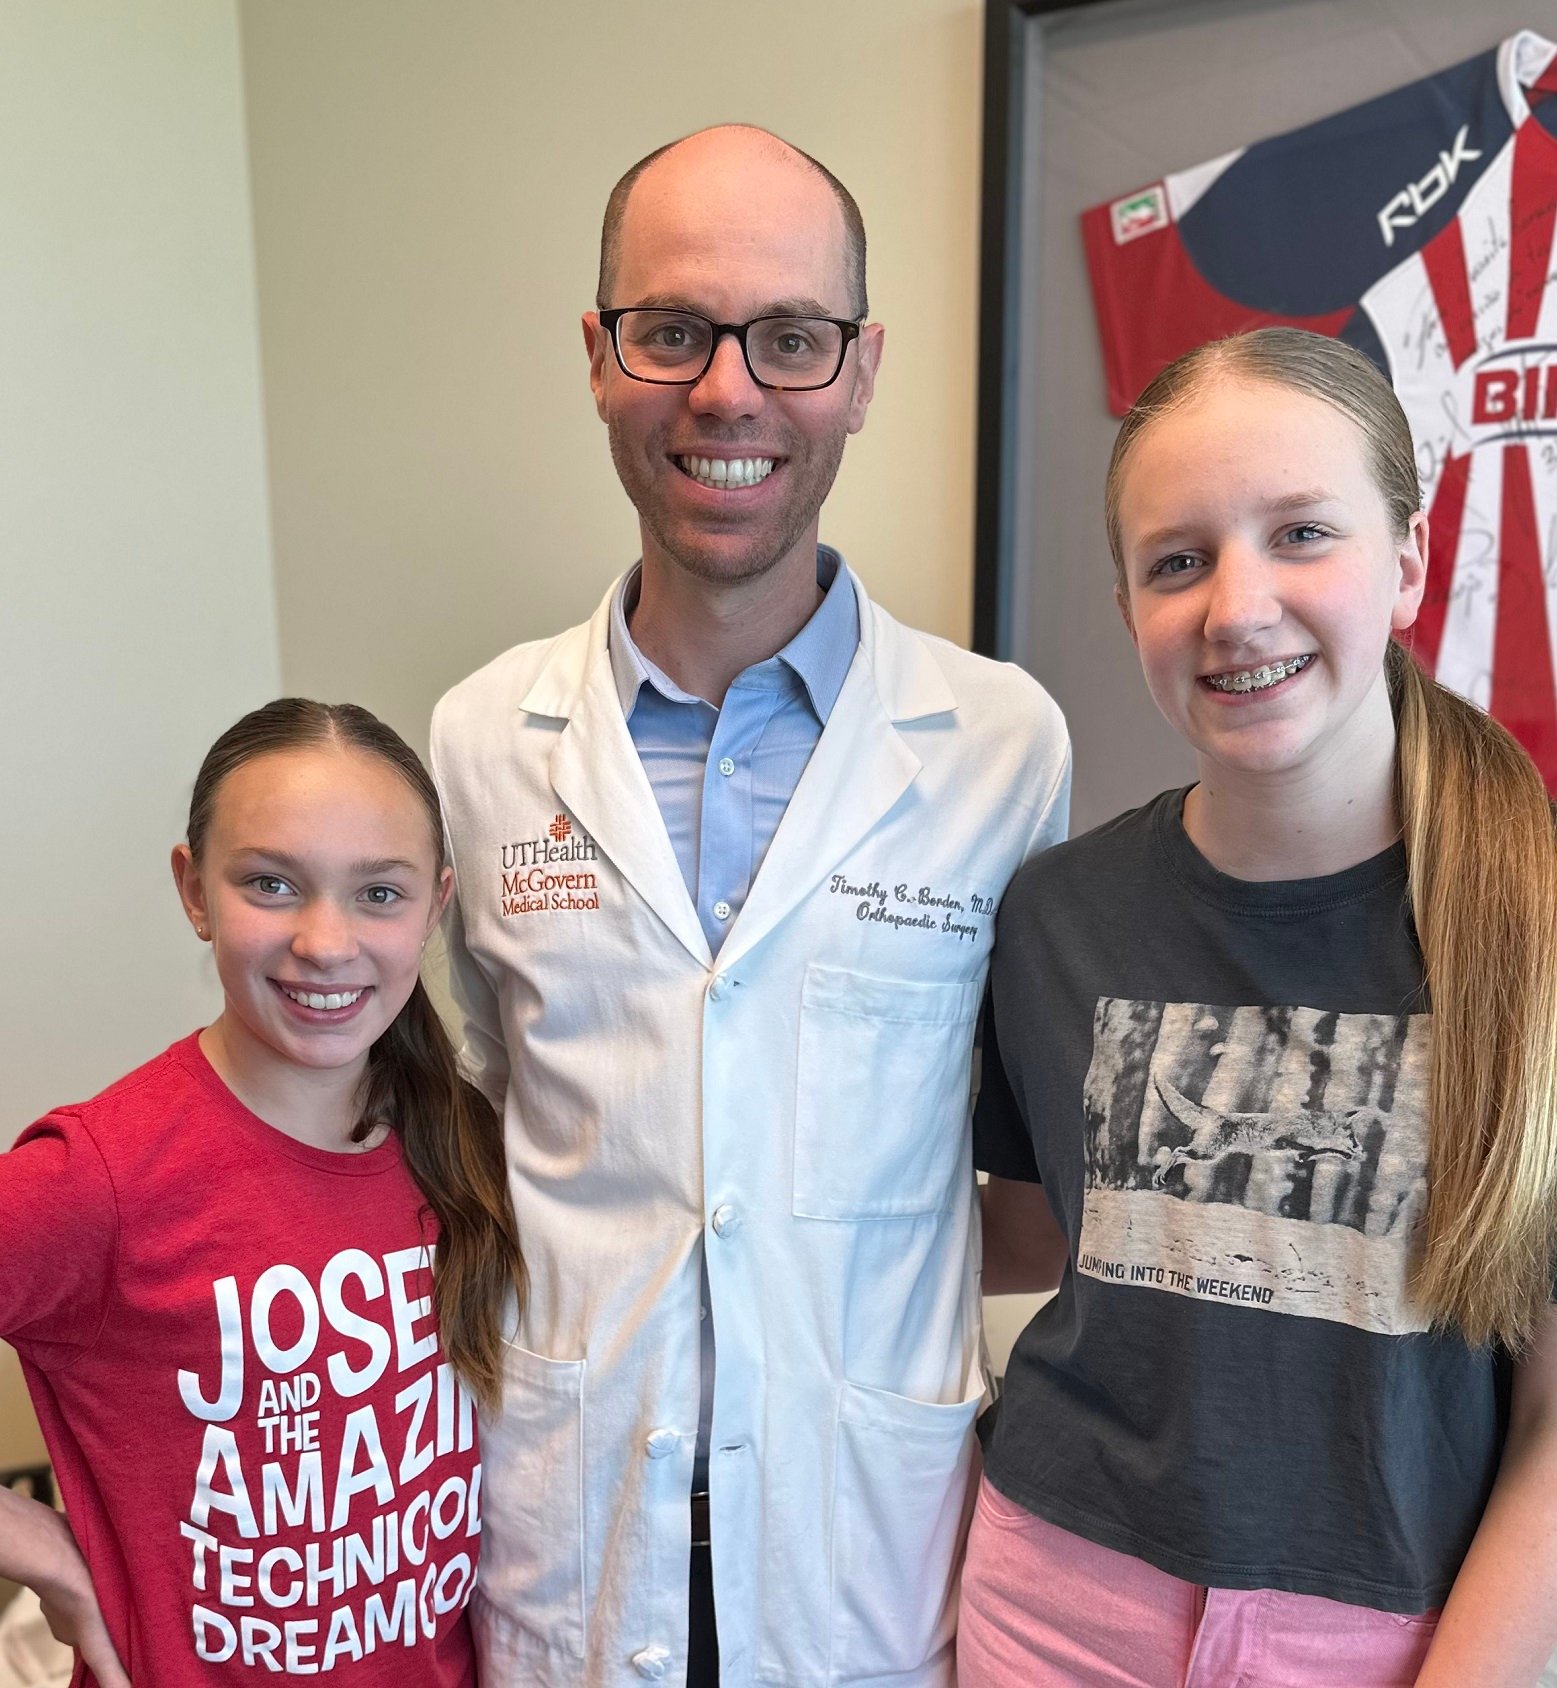 Scoliosis runs in the McDonald family. Timothy Borden, MD, also treats Ellison’s younger sister, Emily, who is just starting with a back brace. (Photo courtesy of McDonald family)